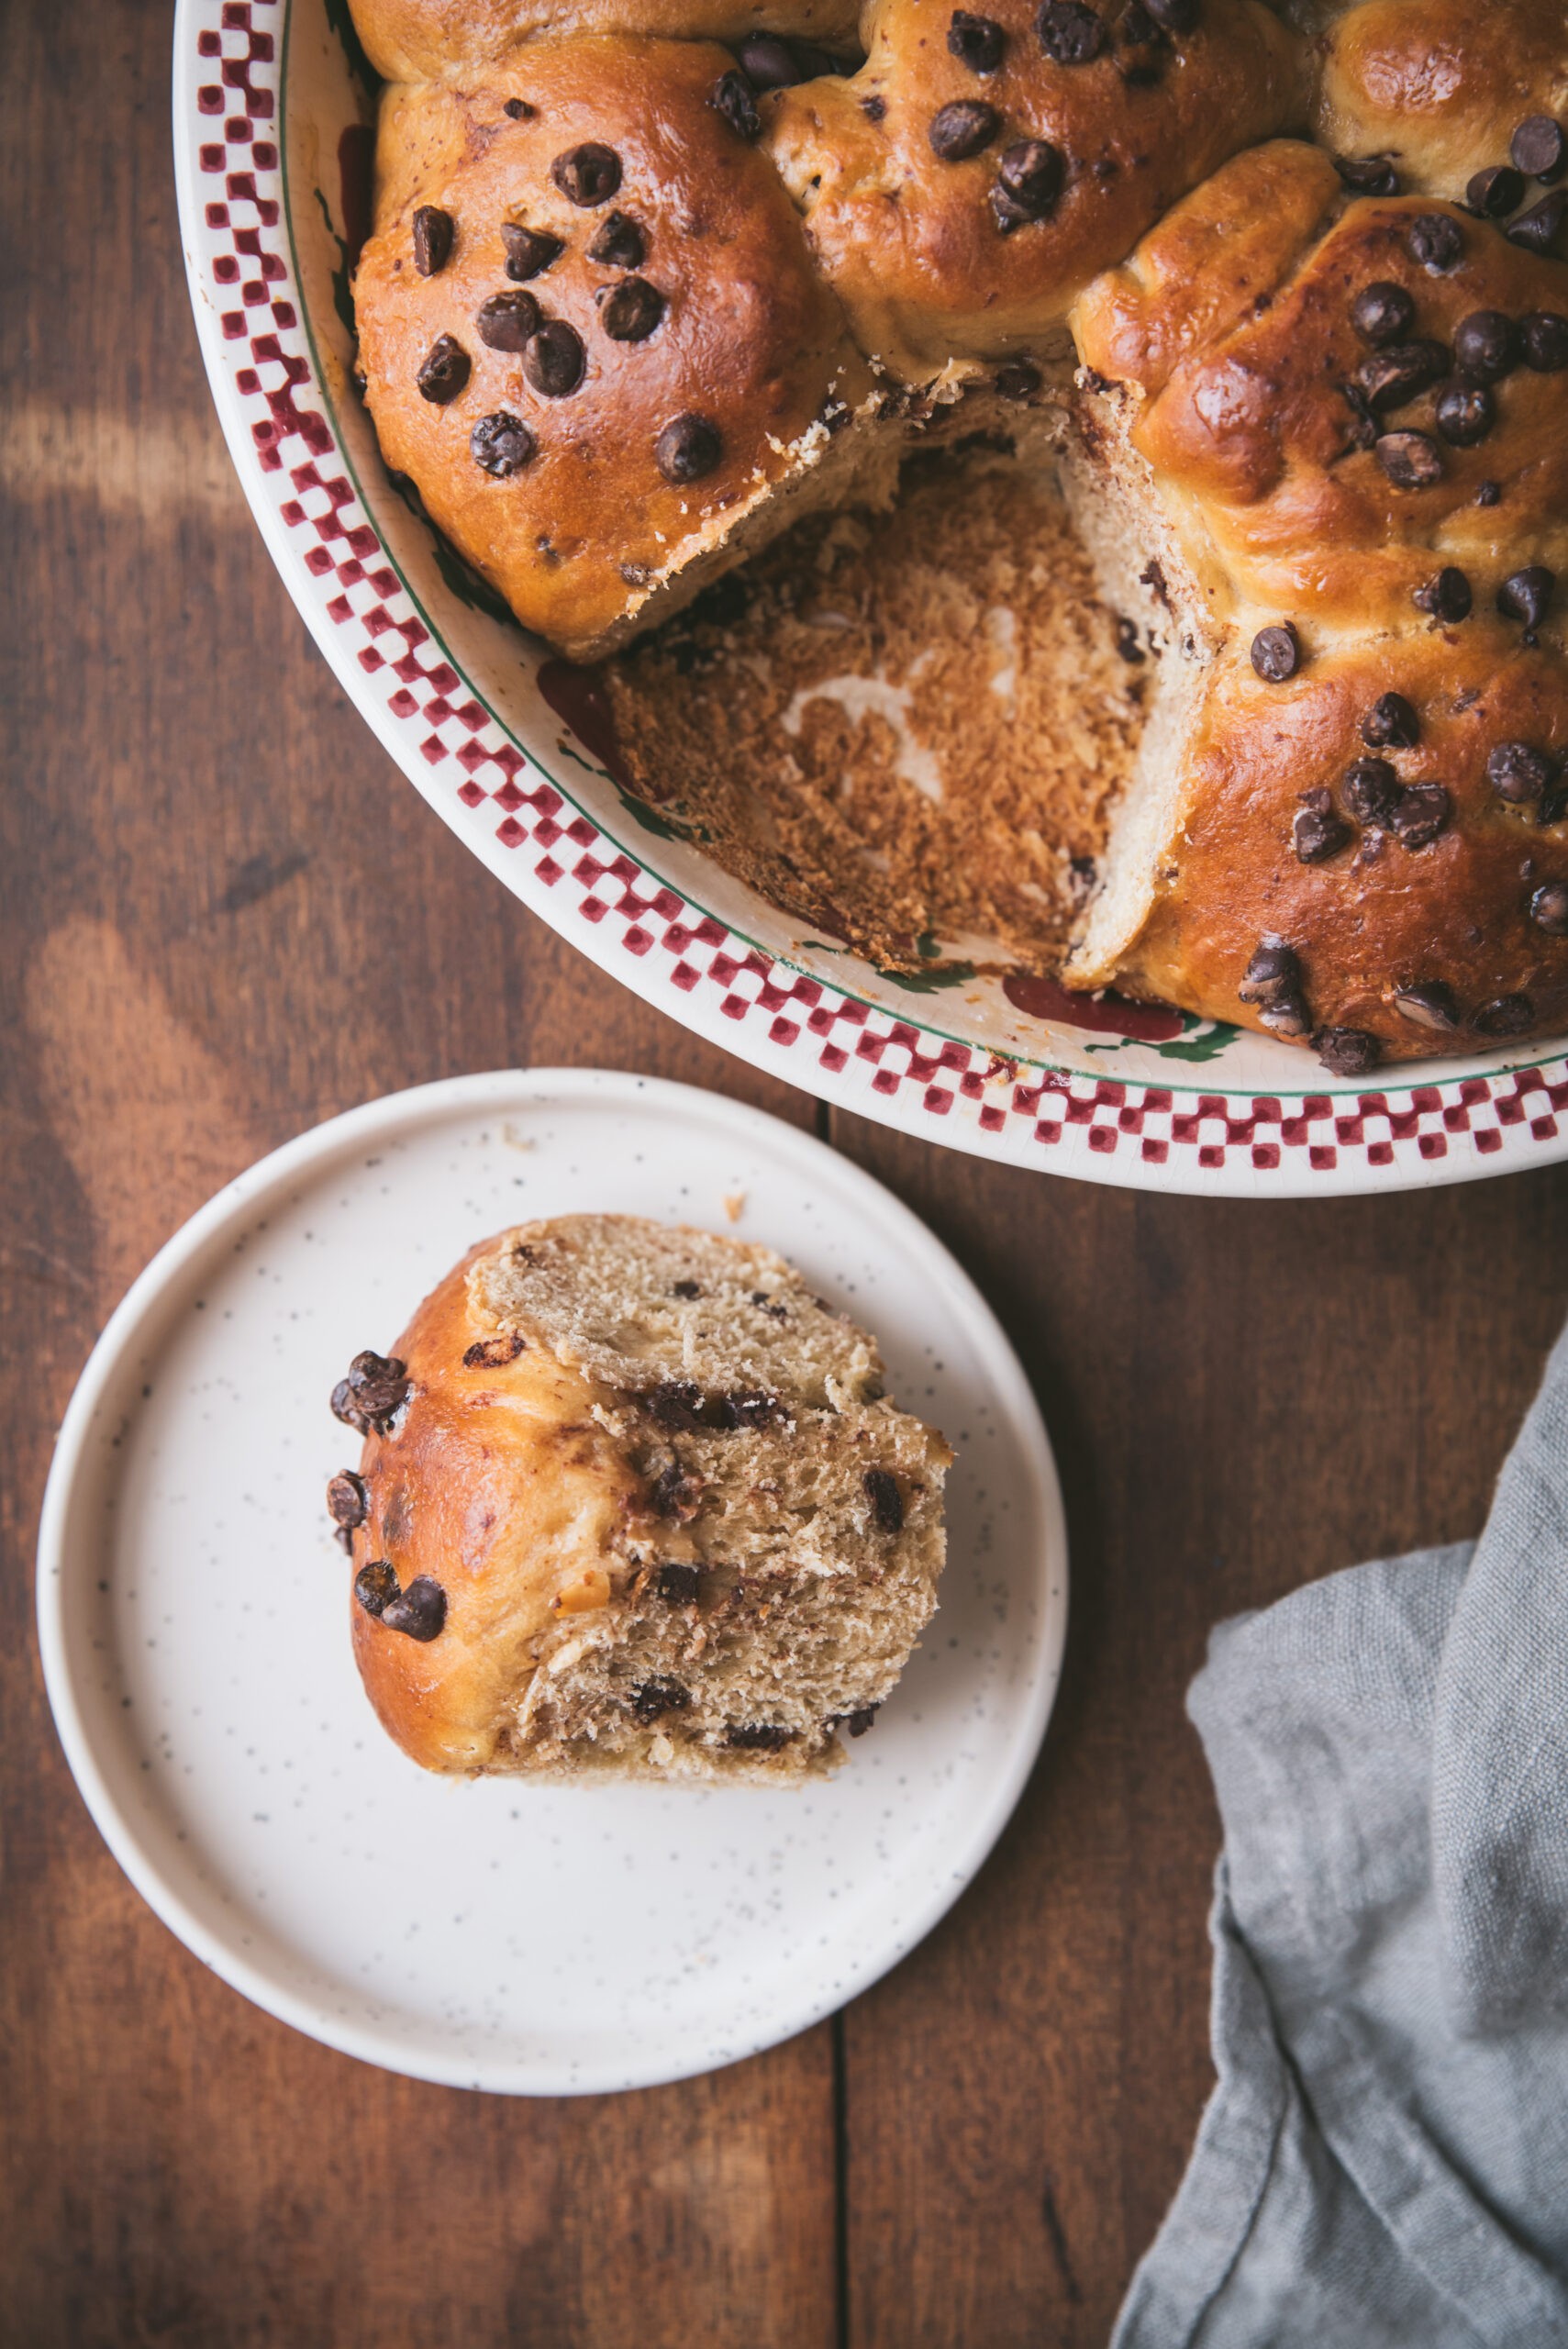 Butchy Brioche Recipe with Chocolate Chips